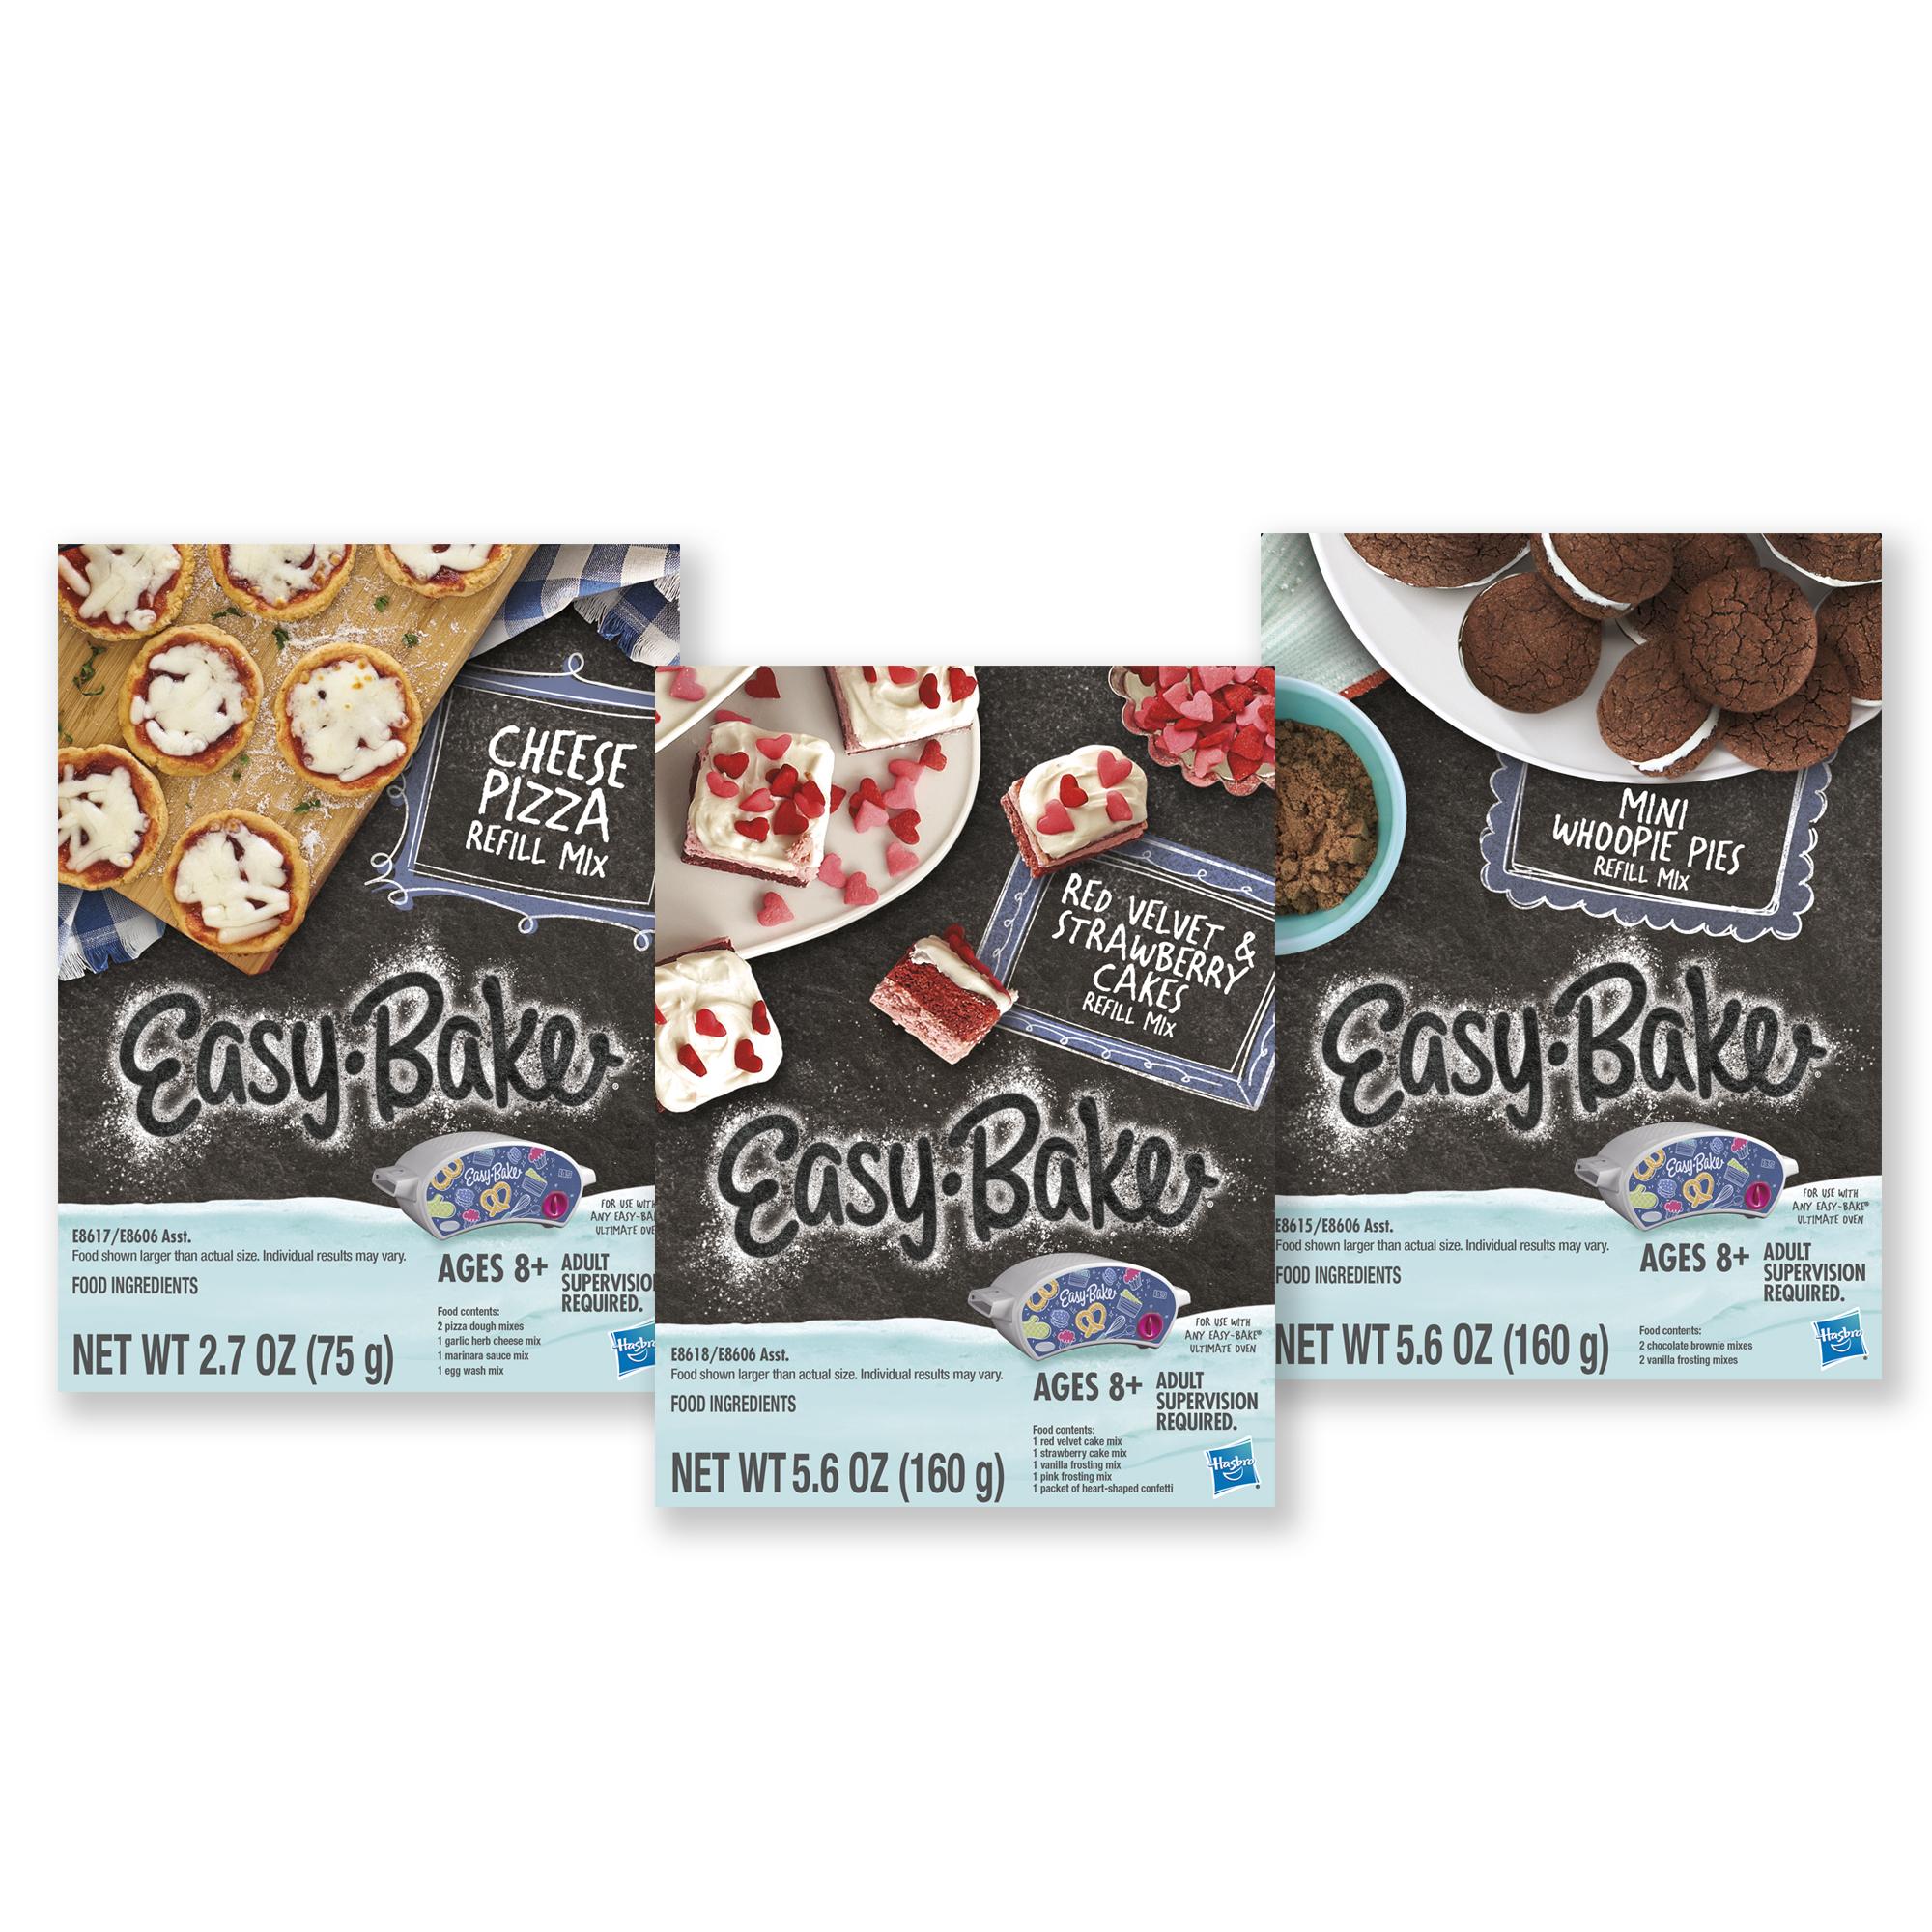 Easy-Bake Ultimate Oven Toy Refill Mix 3-Pack, Pizza, Whoopie Pies, Red Velvet & Strawberry Cake Mixes, Ages 8 and Up